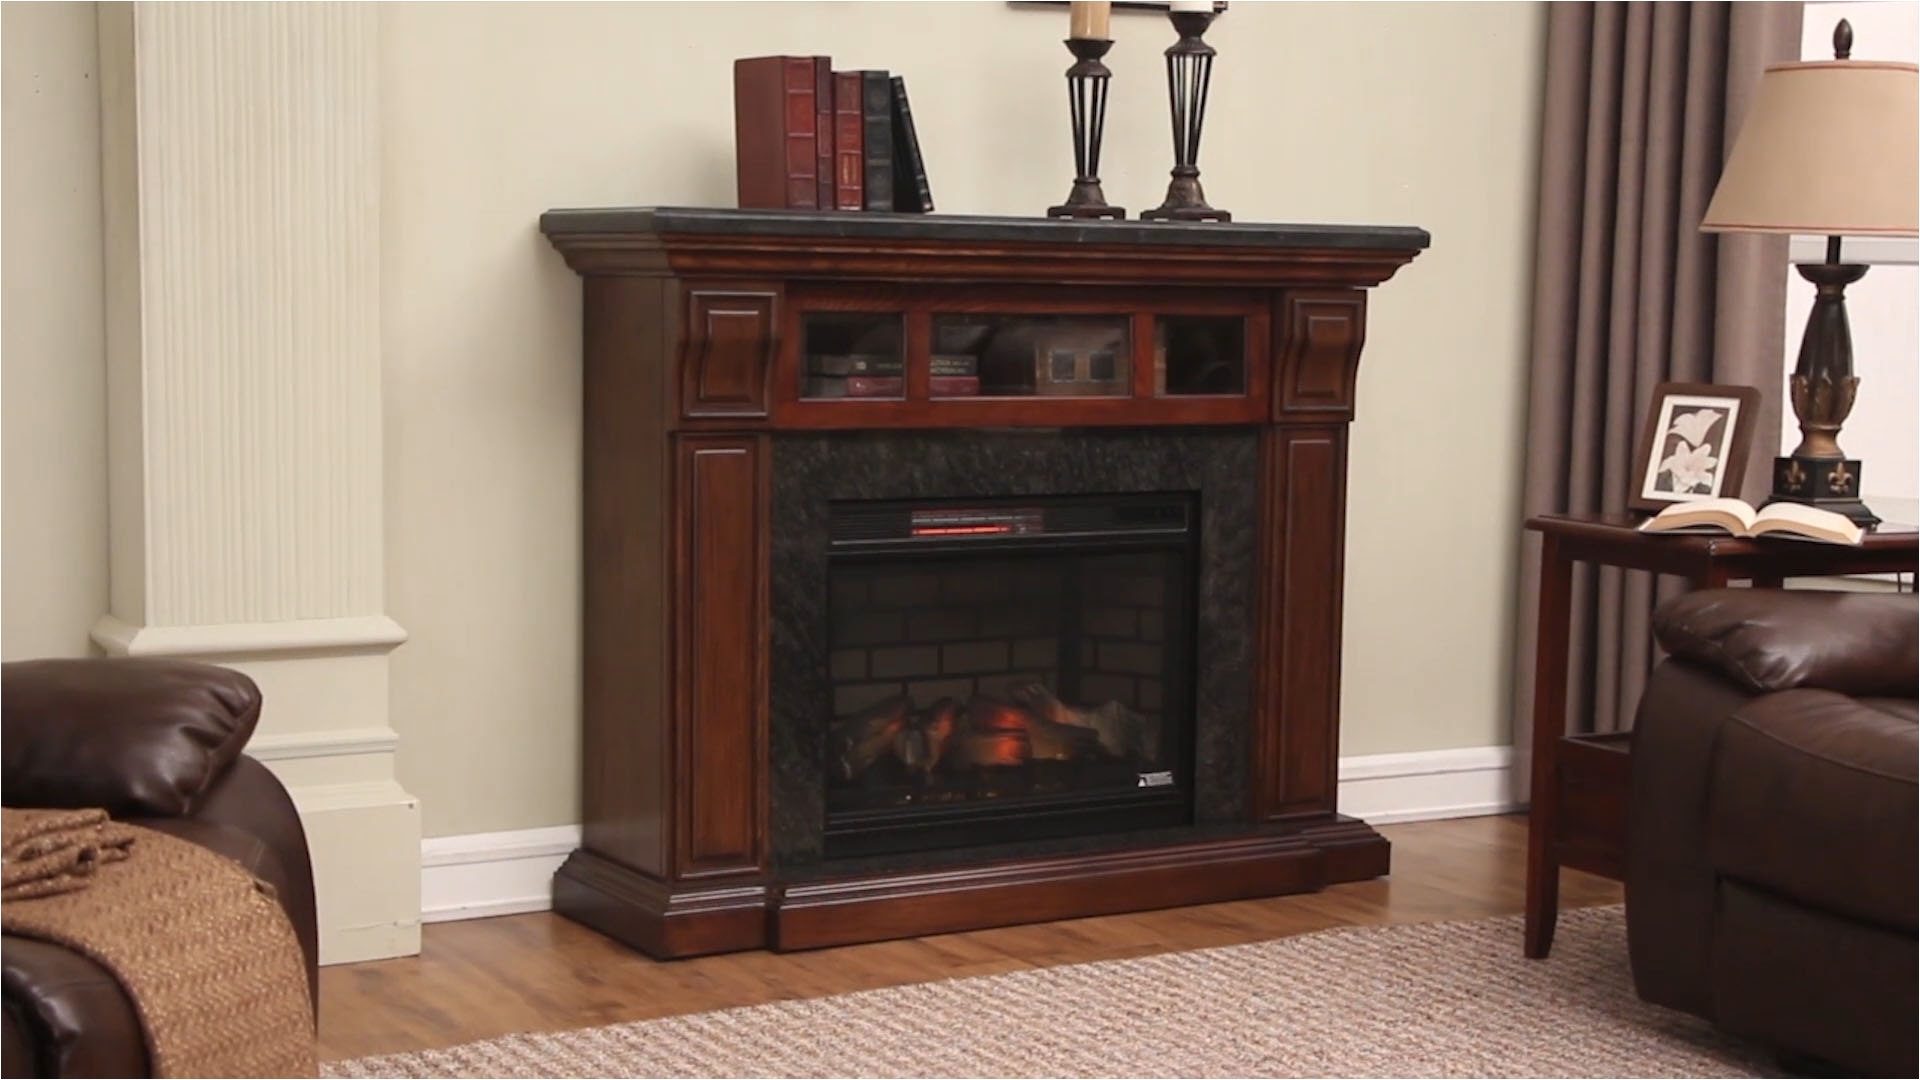 Fake Fireplaces for Sale Awesome Menards Electric Fireplaces Sale